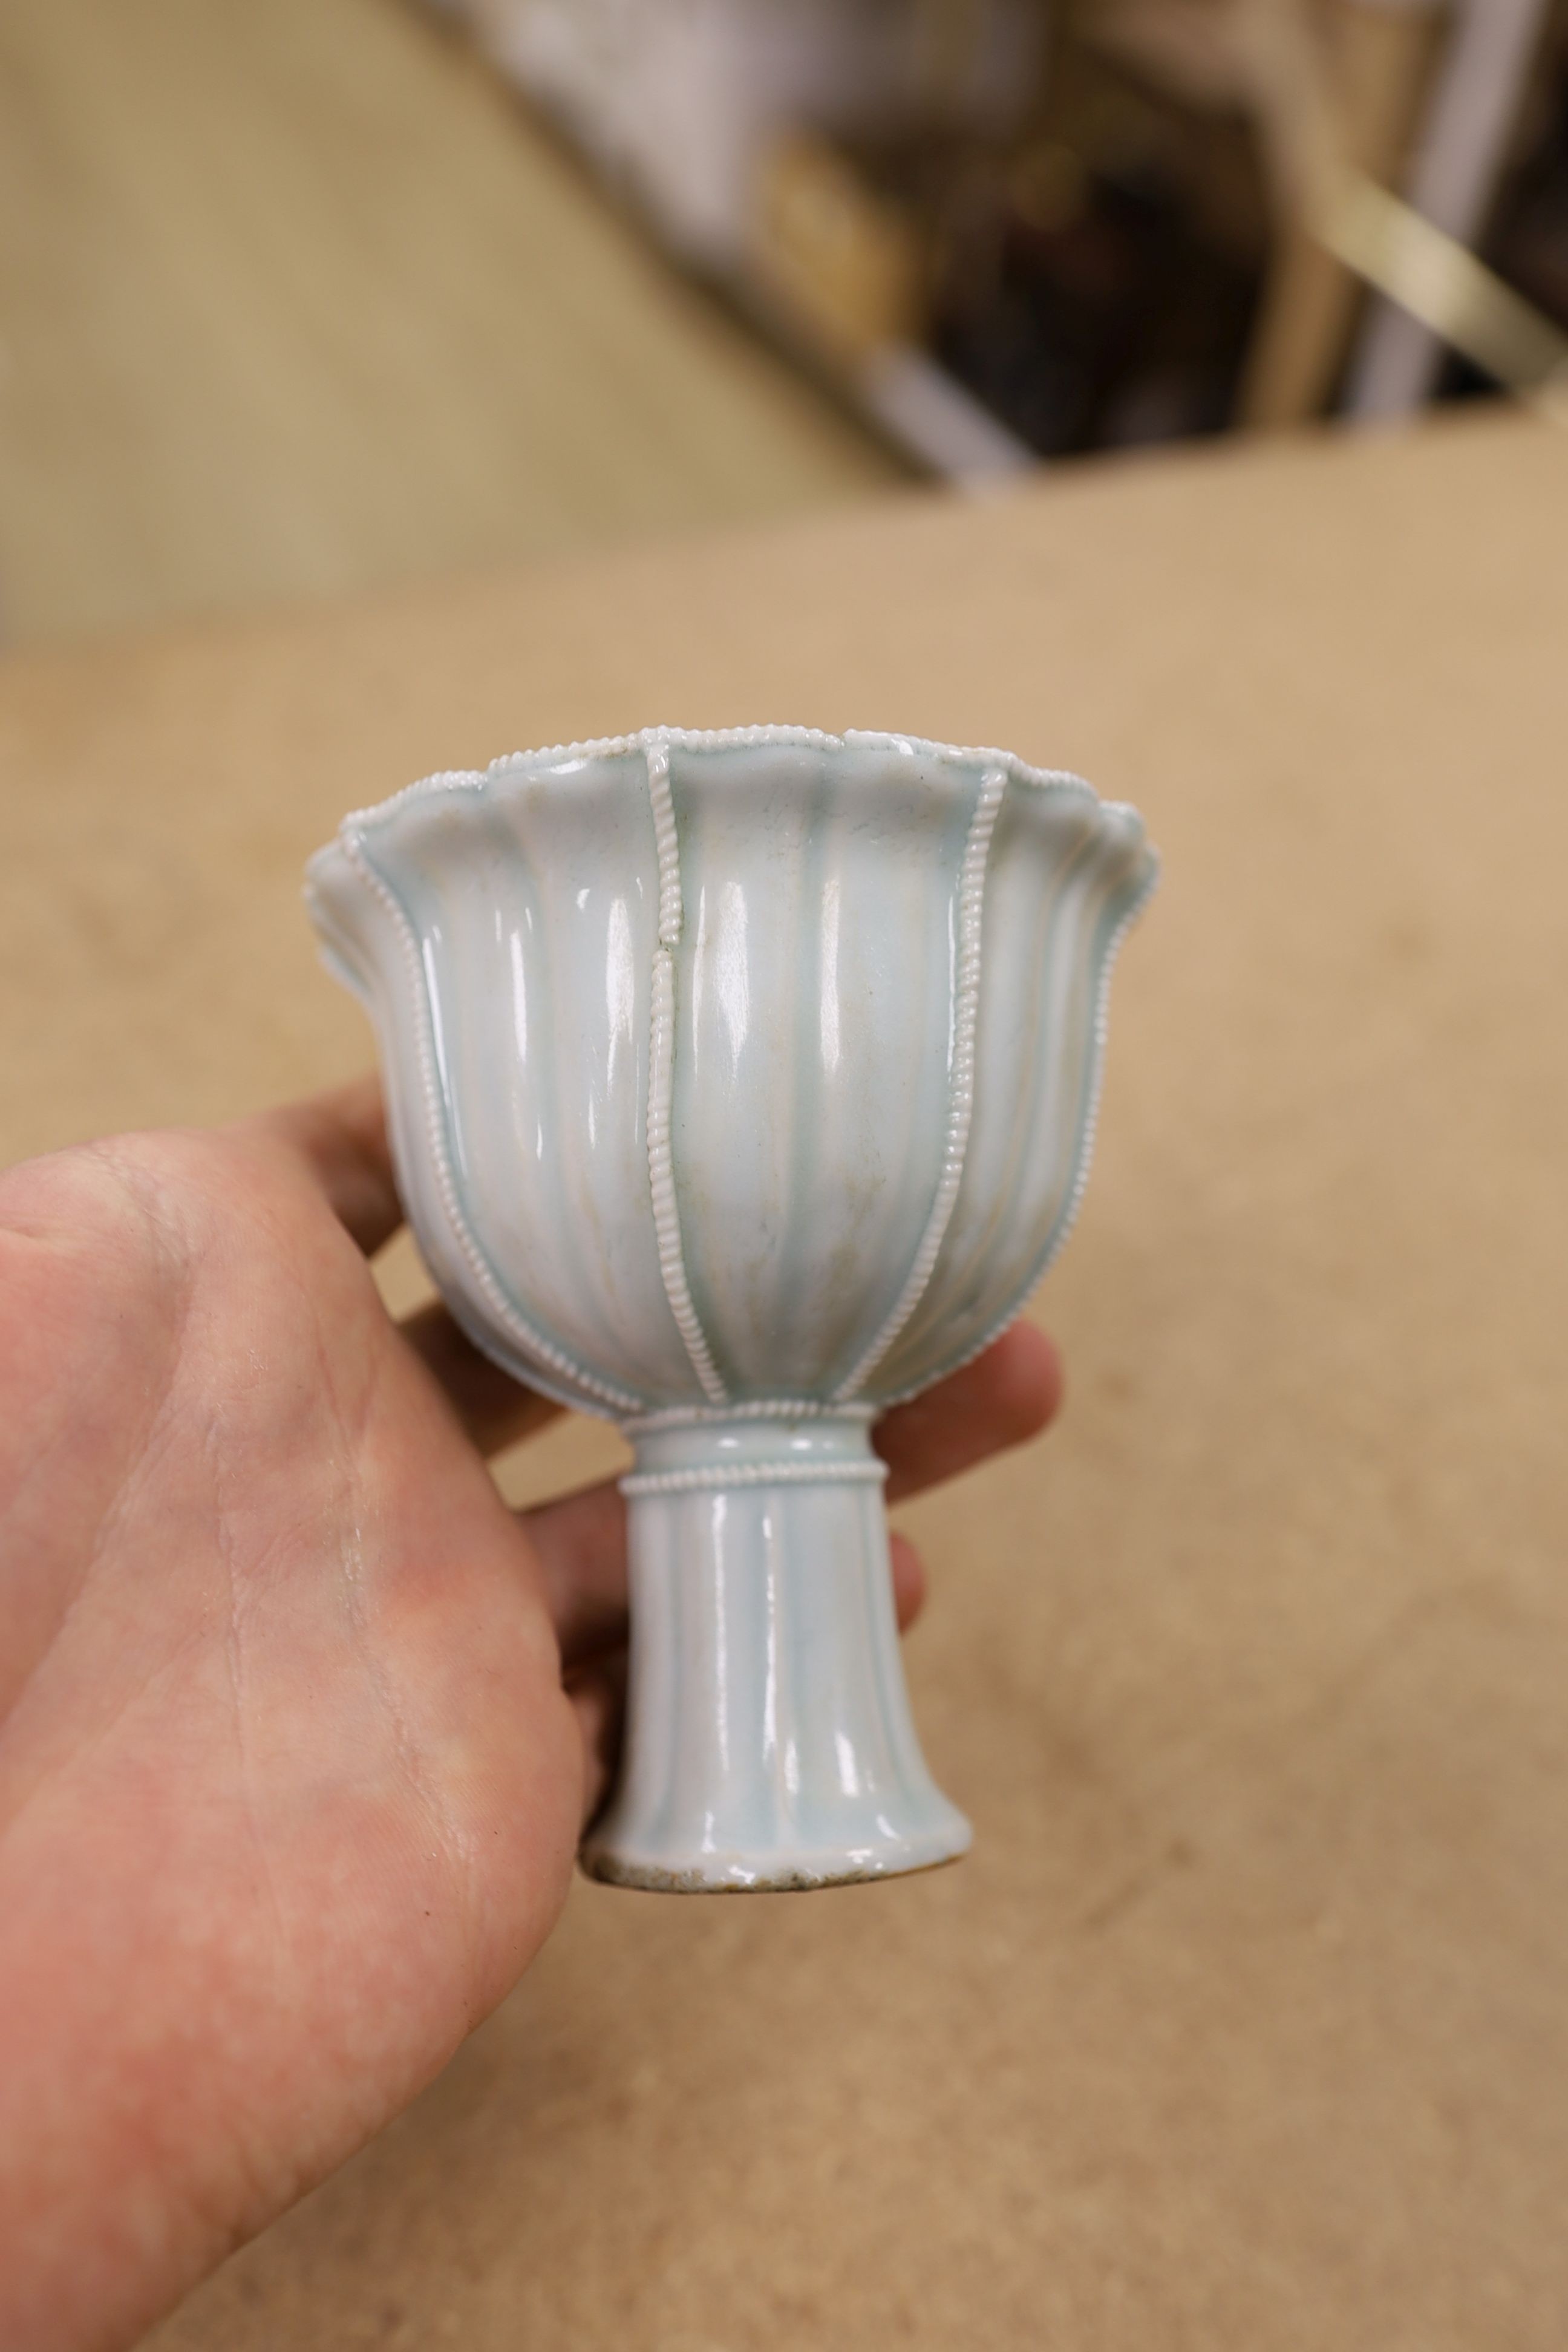 A Chinese Qingbai type stem cup., 10 cms high.